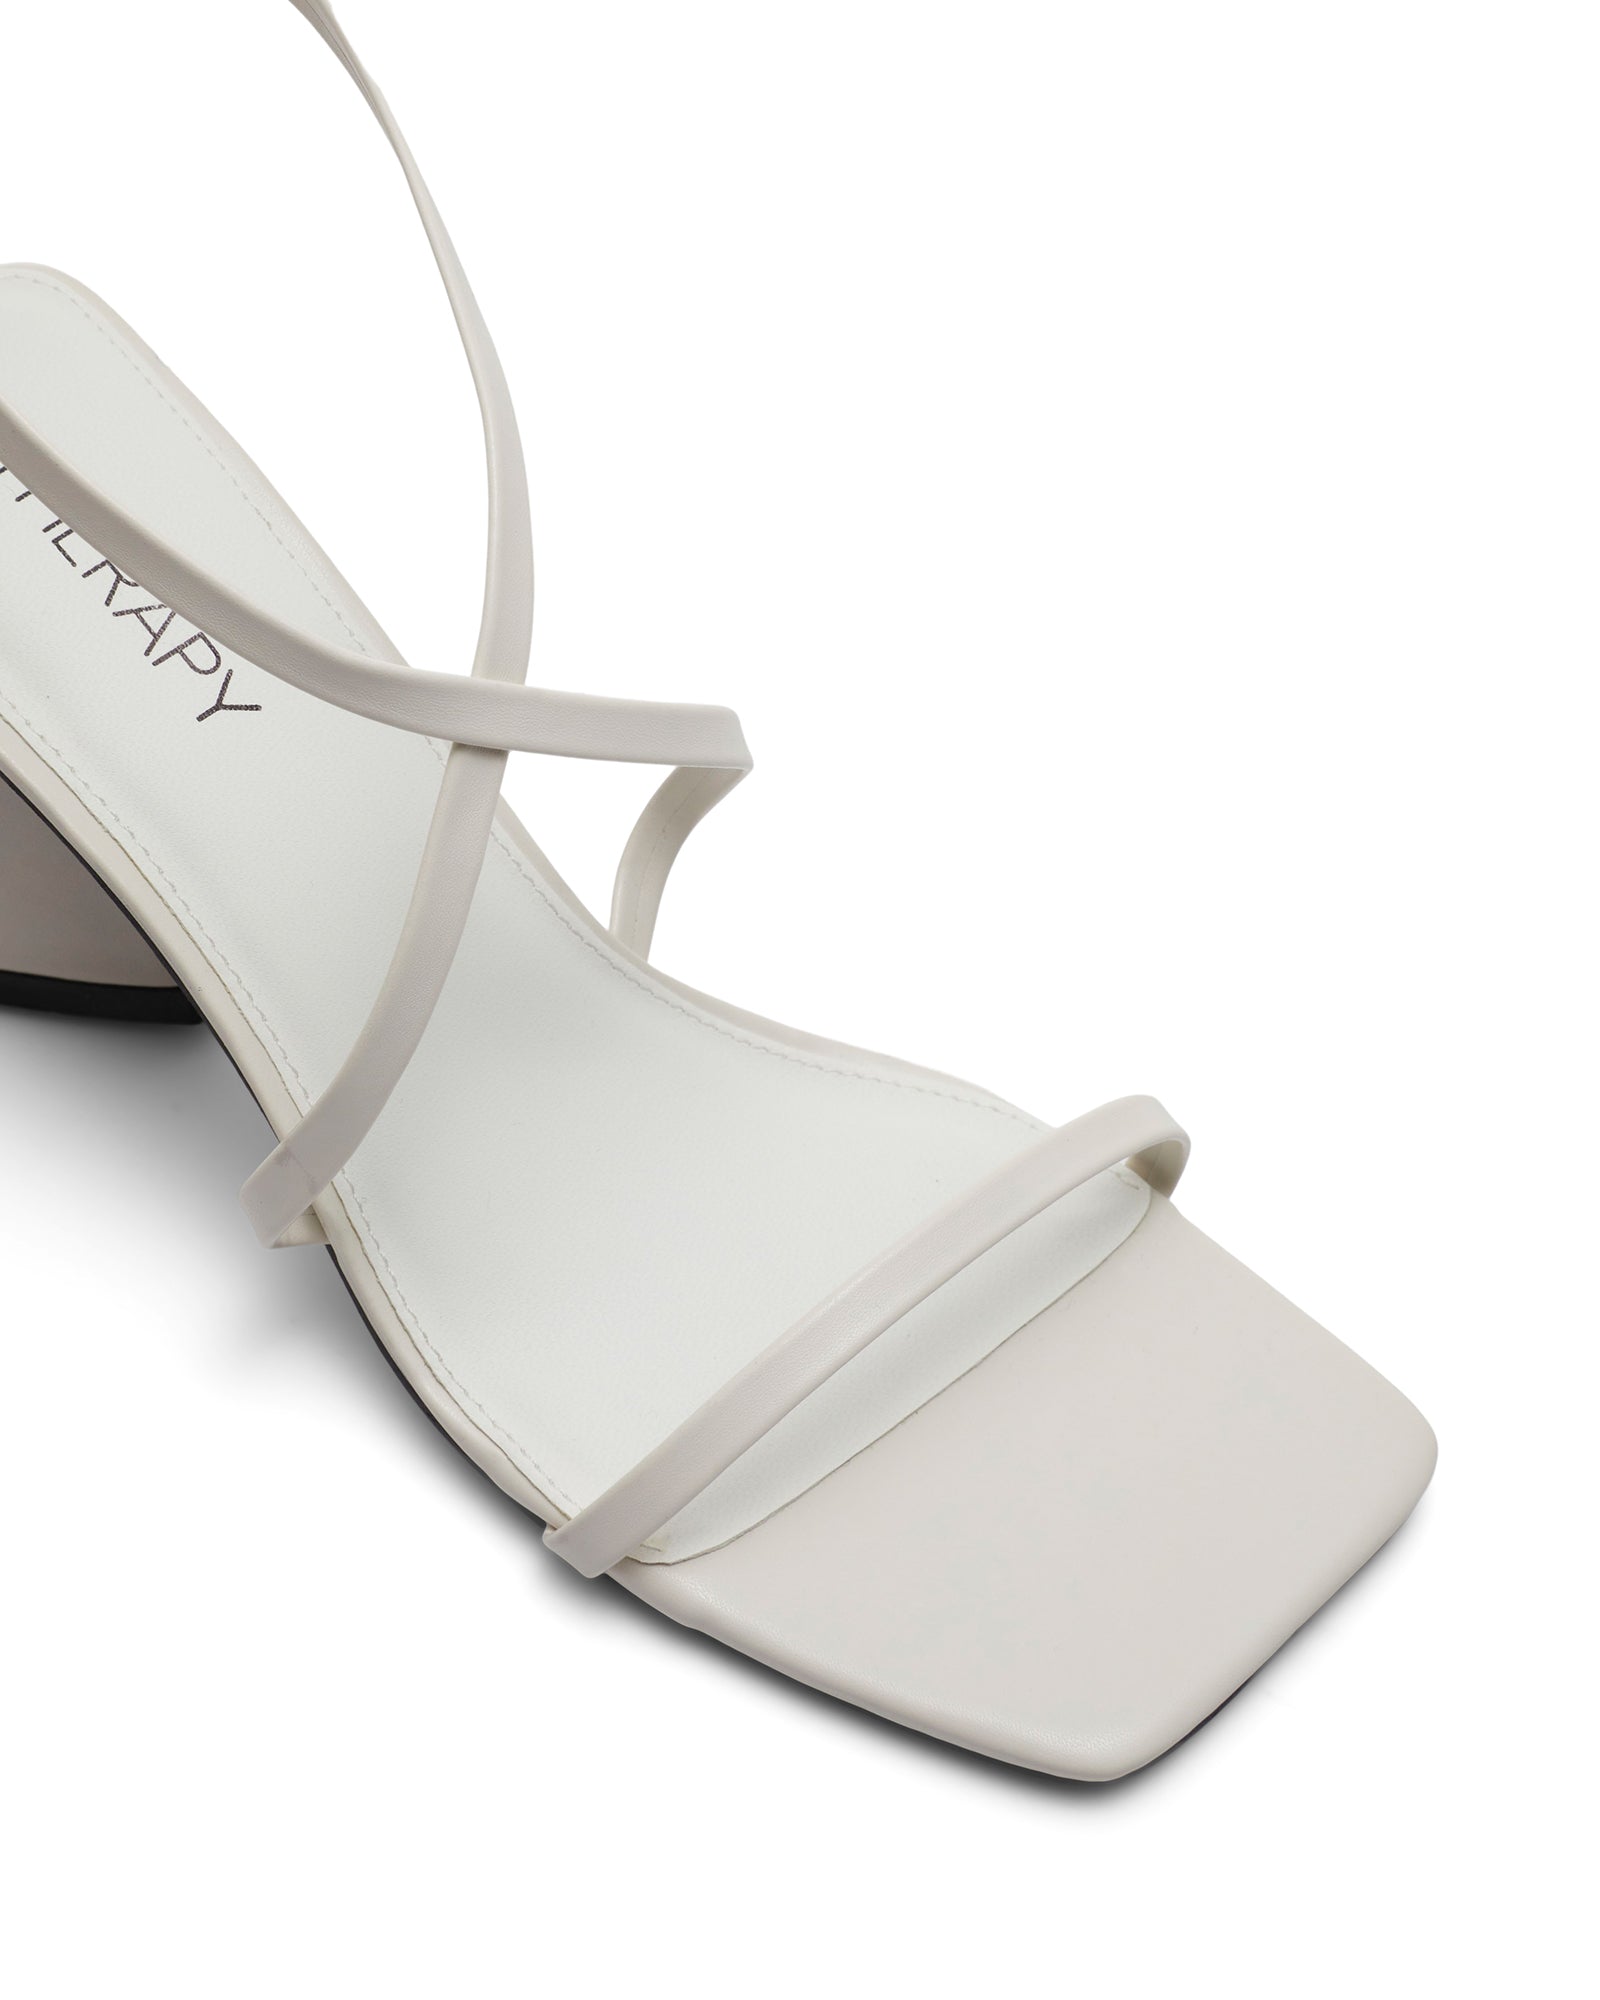 Therapy Shoes Pulse White | Women's Heels | Sandals | Strappy | Dress